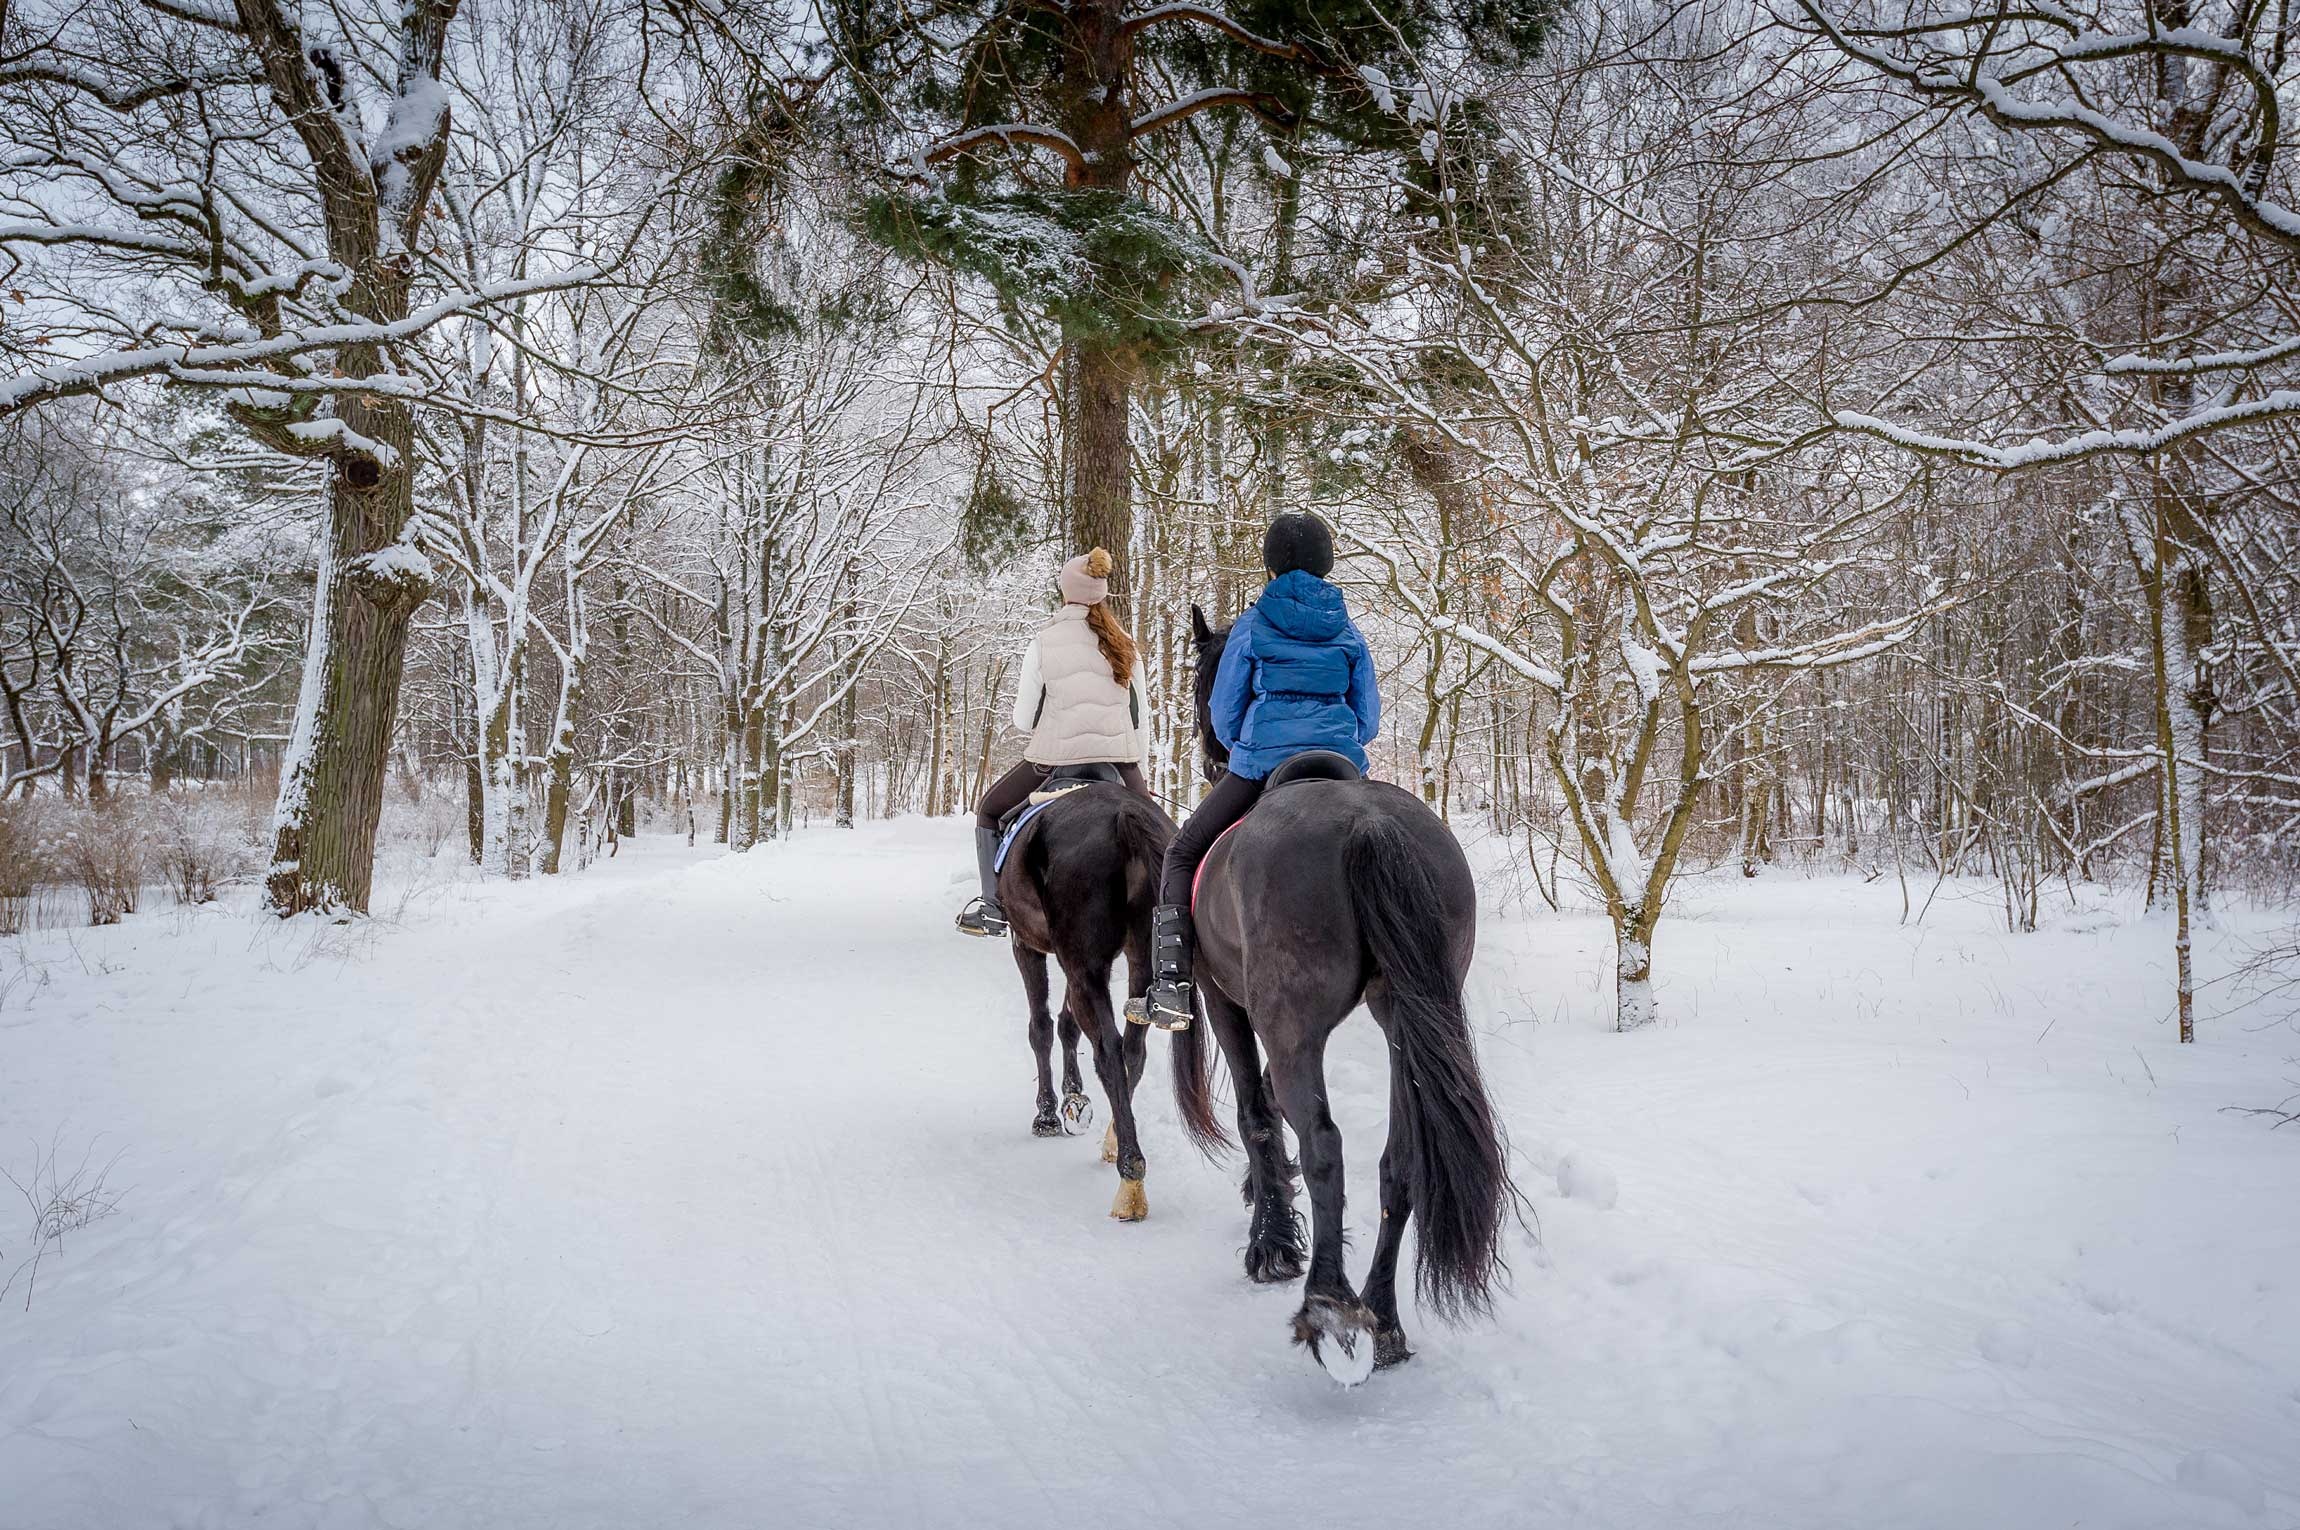 Winter riding tips, Navigating snow and ice, Rider's safety, Horse care in winter, 2300x1530 HD Desktop